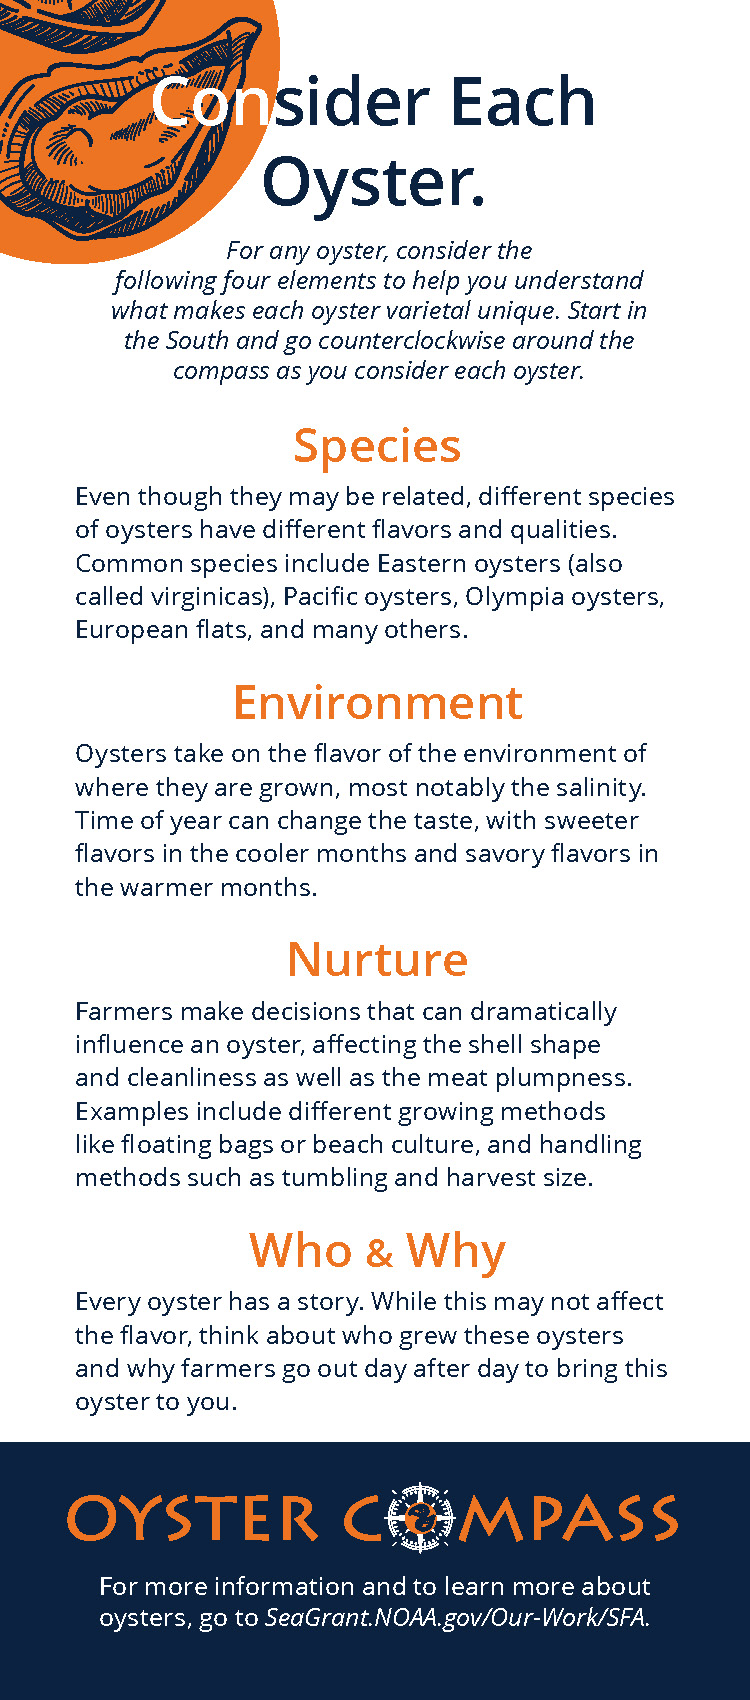 Oyster Compass infographic